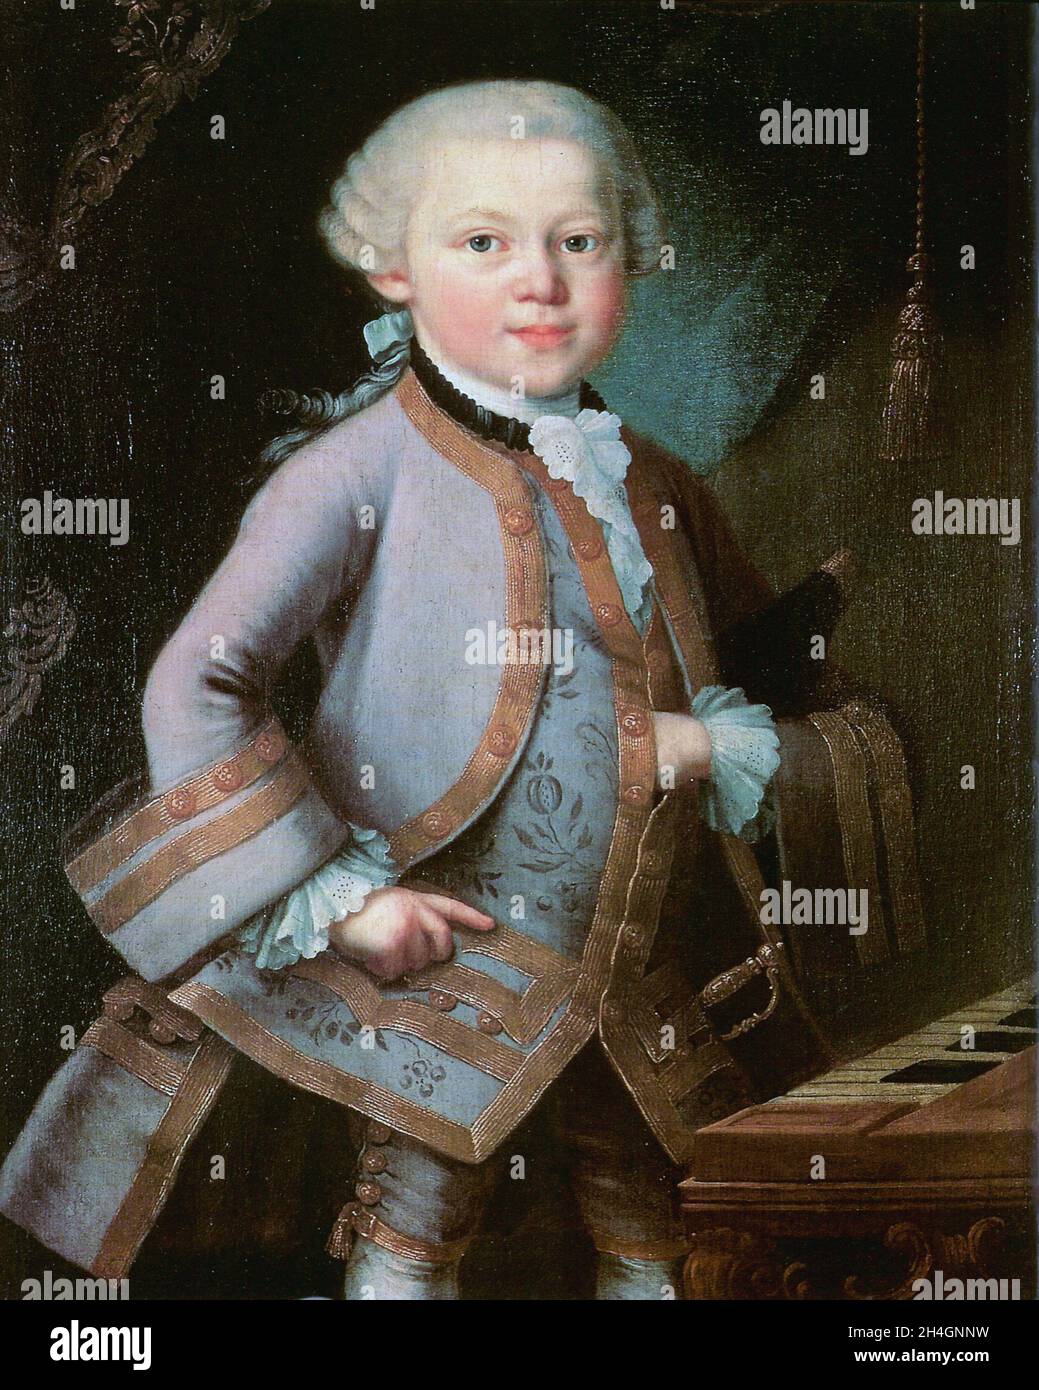 A young Wolfgang Amadeus Mozart, aged 7. Stock Photo